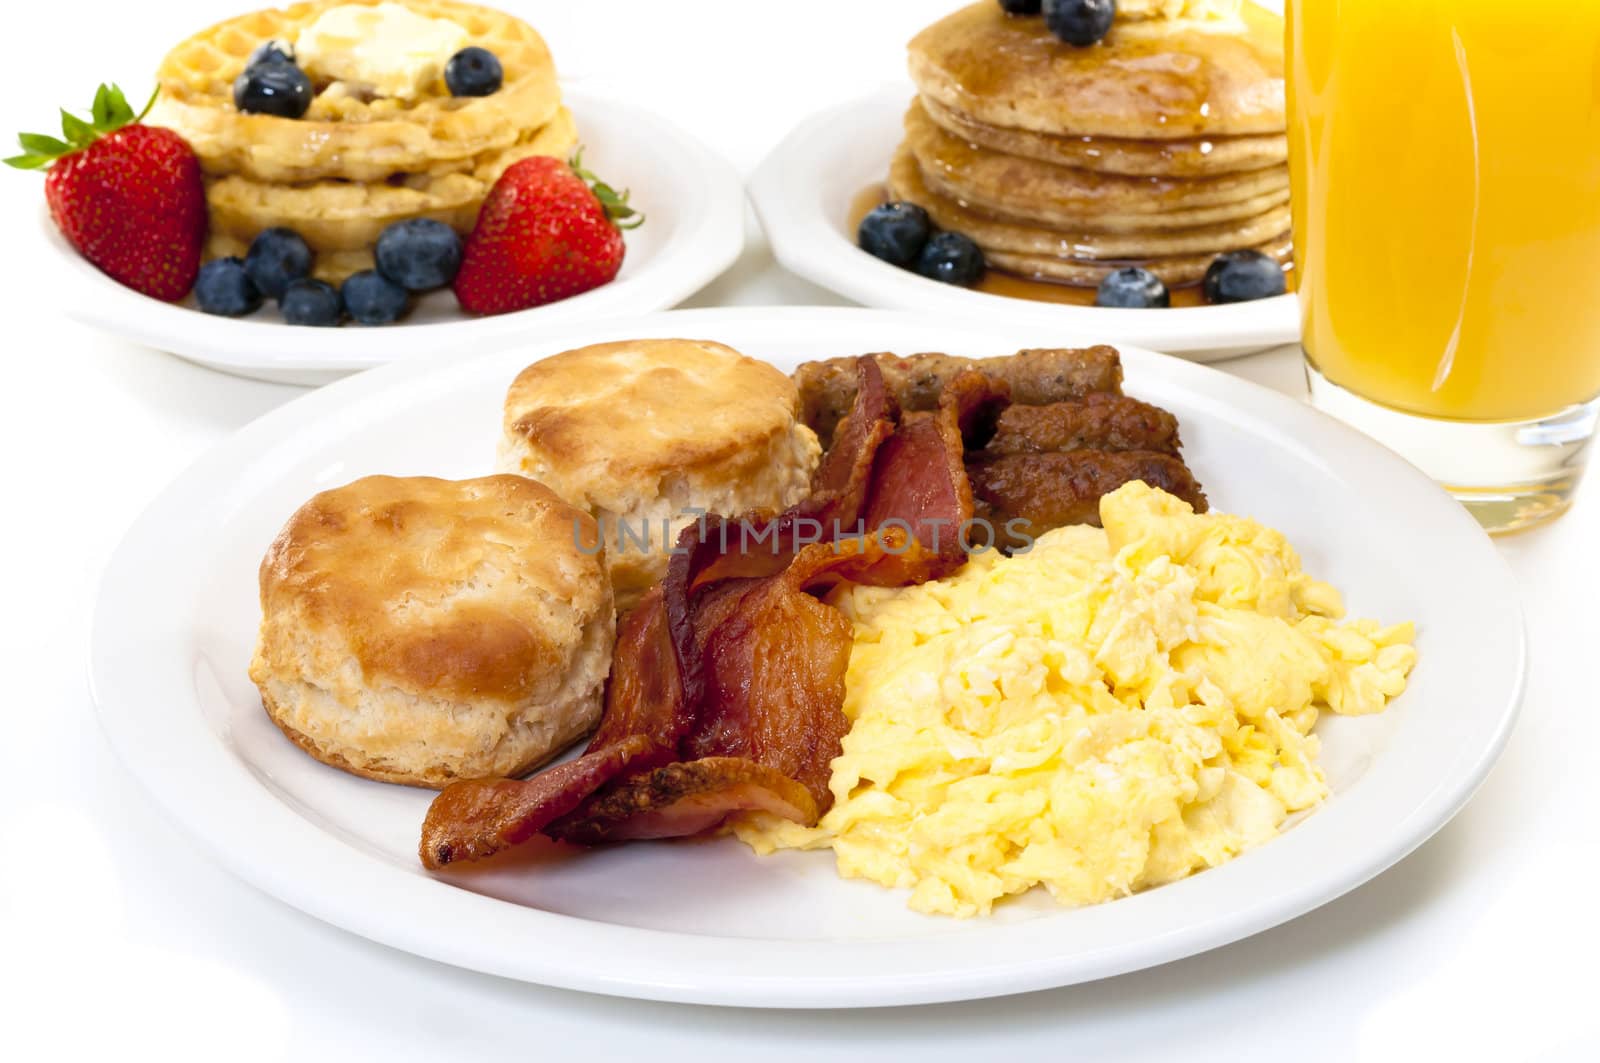 Breakfast plate with scrambled eggs, bacon, and buttermilk biscuits.  Waffles, pancakes, and orange juice in background.  Isolated on white background.